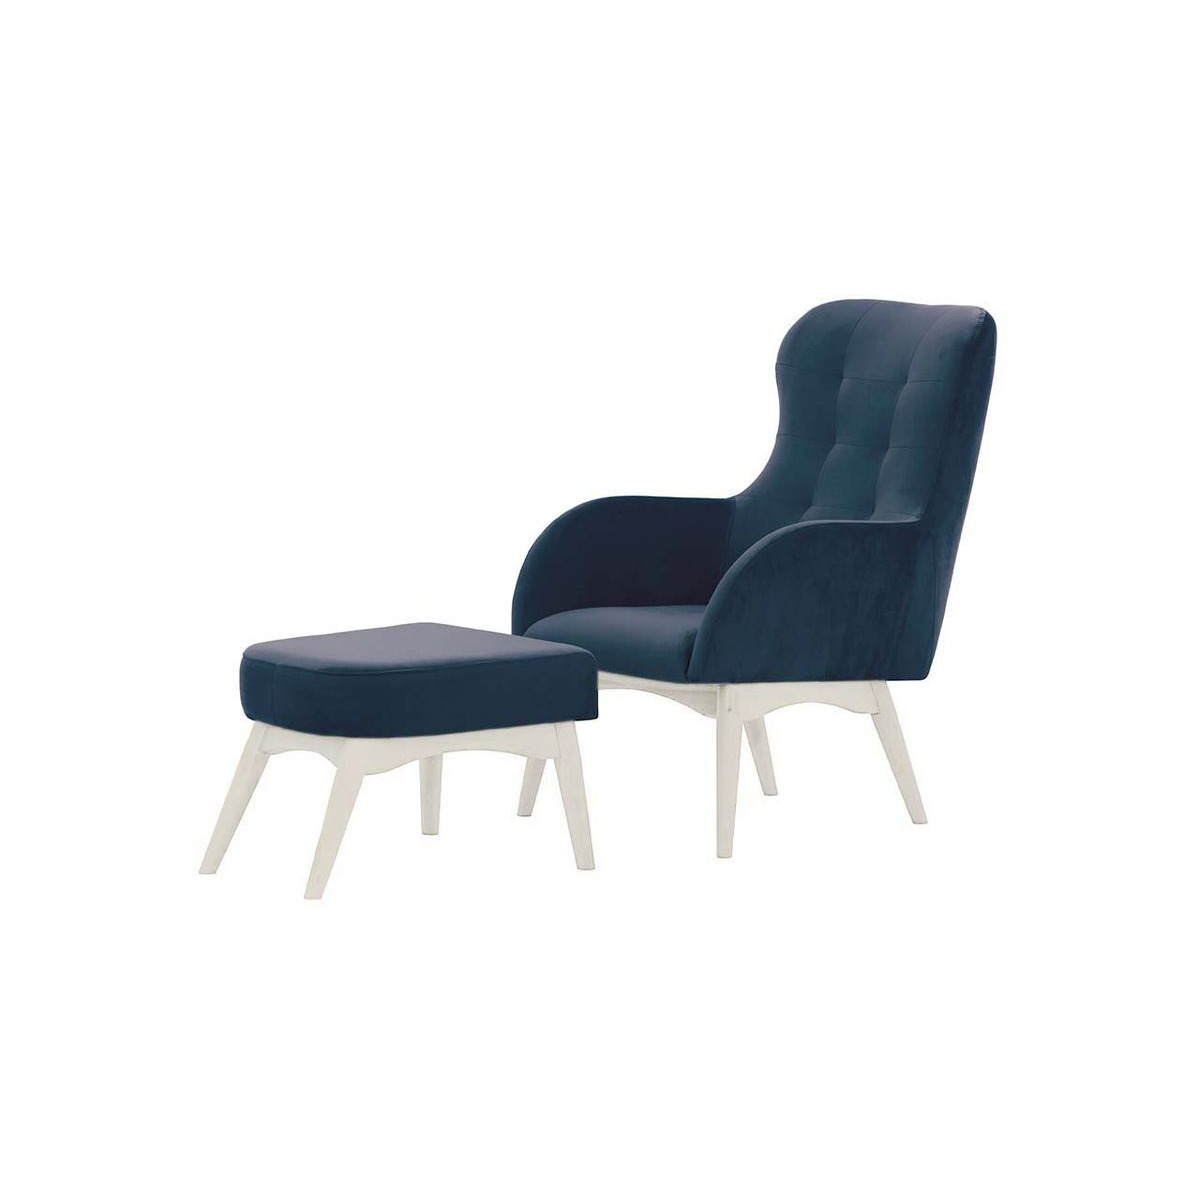 Hollis Wingback Chair with a Footstool, blue, Leg colour: white - image 1